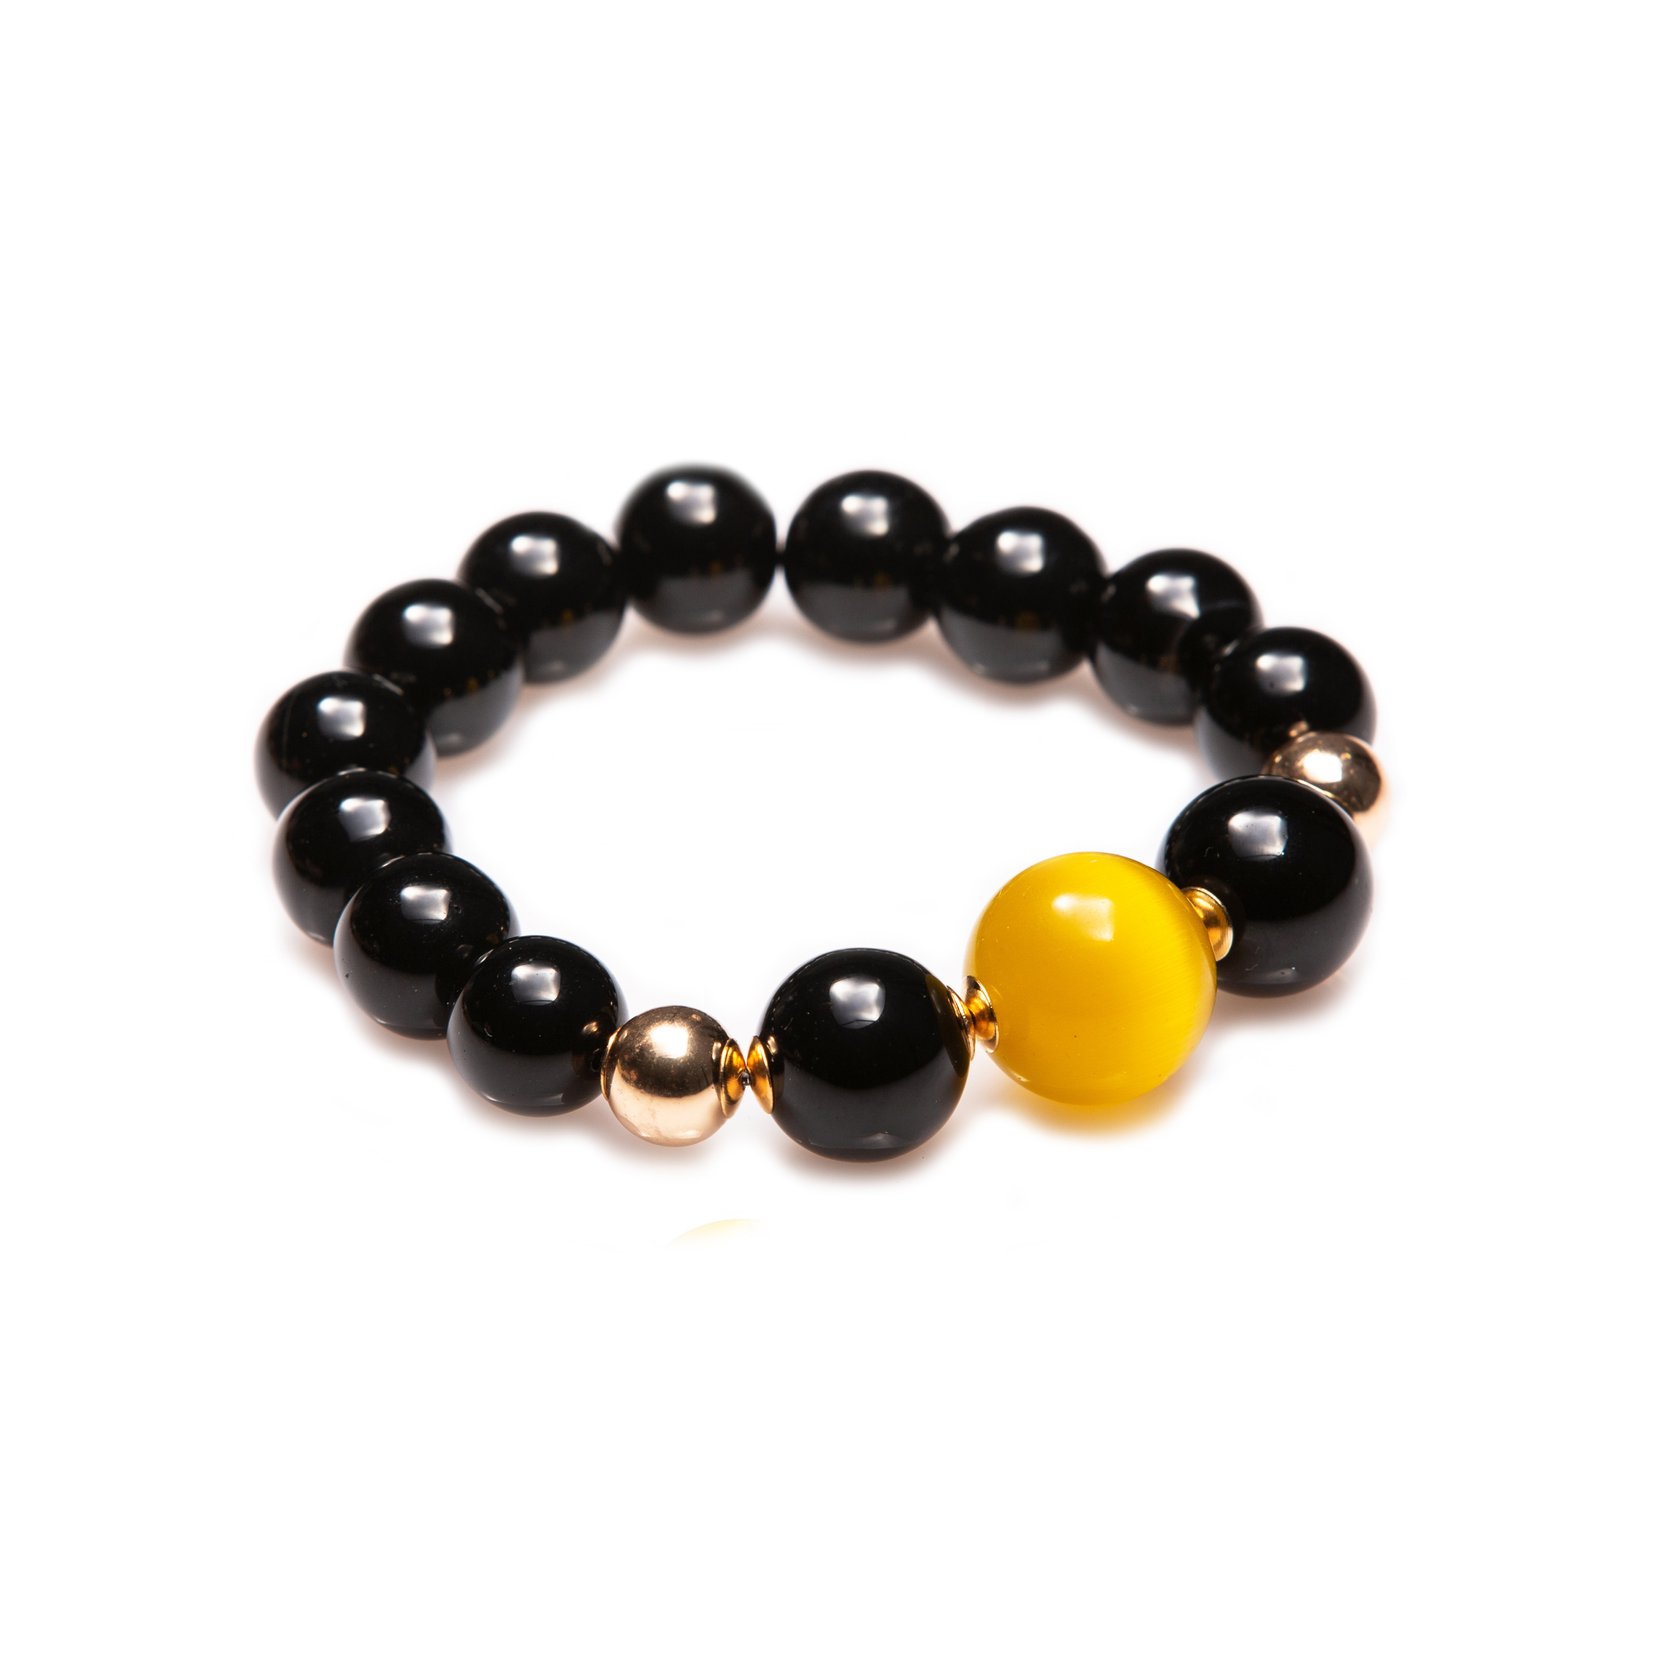 Black agate bracelet with yellow stone.